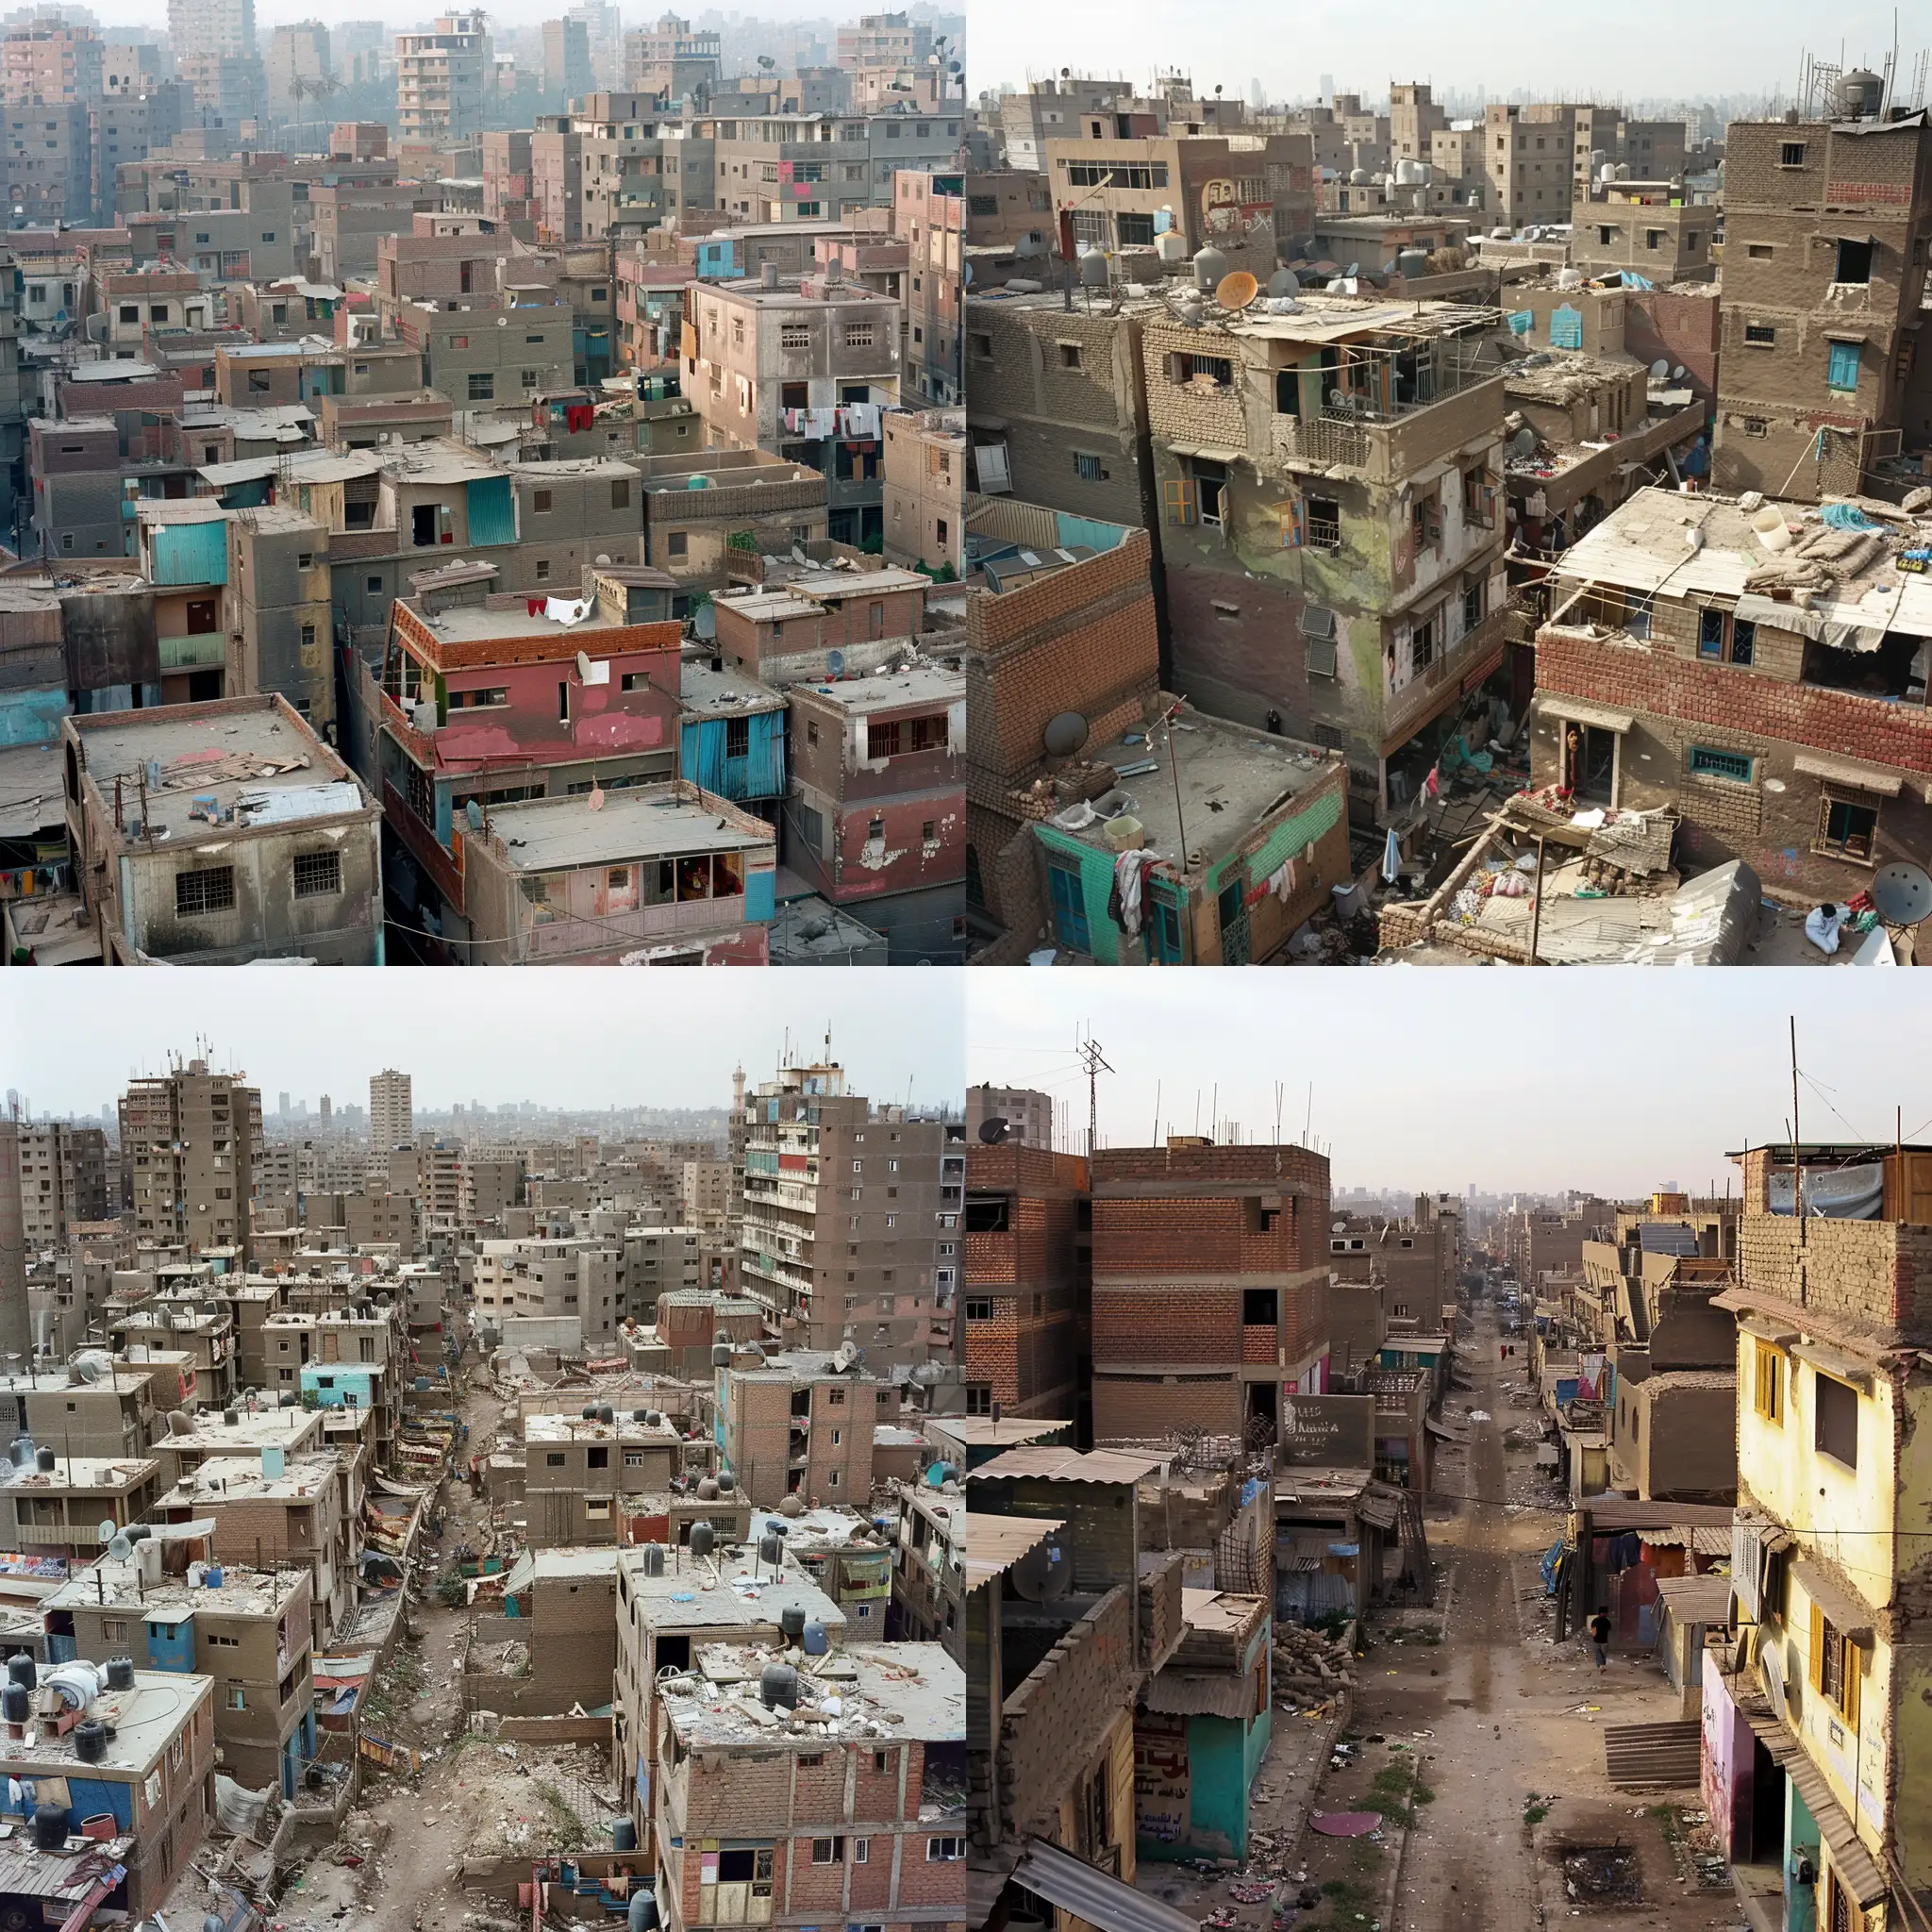 Illegal settlements in Egypt, called "informal settlements" and "slums", are areas where housing is built without proper building permits. They arose as a result of rapid urban growth and a lack of affordable housing. Here are some characteristics of these settlements:  - Buildings: Houses are built from inexpensive and readily available materials such as brick, wood, metal sheets and even cardboard. The buildings are pressed tightly against each other without clear planning and street network. - Infrastructure: These areas lack basic infrastructure such as sewerage, clean water, electricity and roads. This results in poor sanitation and makes access to services difficult. - Economy: Residents engage in the informal economy such as street vending, handicrafts and odd jobs to make ends meet. - Social conditions: Illegal settlements are characterized by high levels of poverty and overcrowding. Education and health services are limited and inaccessible.  These areas are found around major cities such as Cairo, where they are located on the outskirts and on land not designated for construction. Despite the difficulties faced by the residents of these settlements, they have a strong sense of community and mutual assistance.